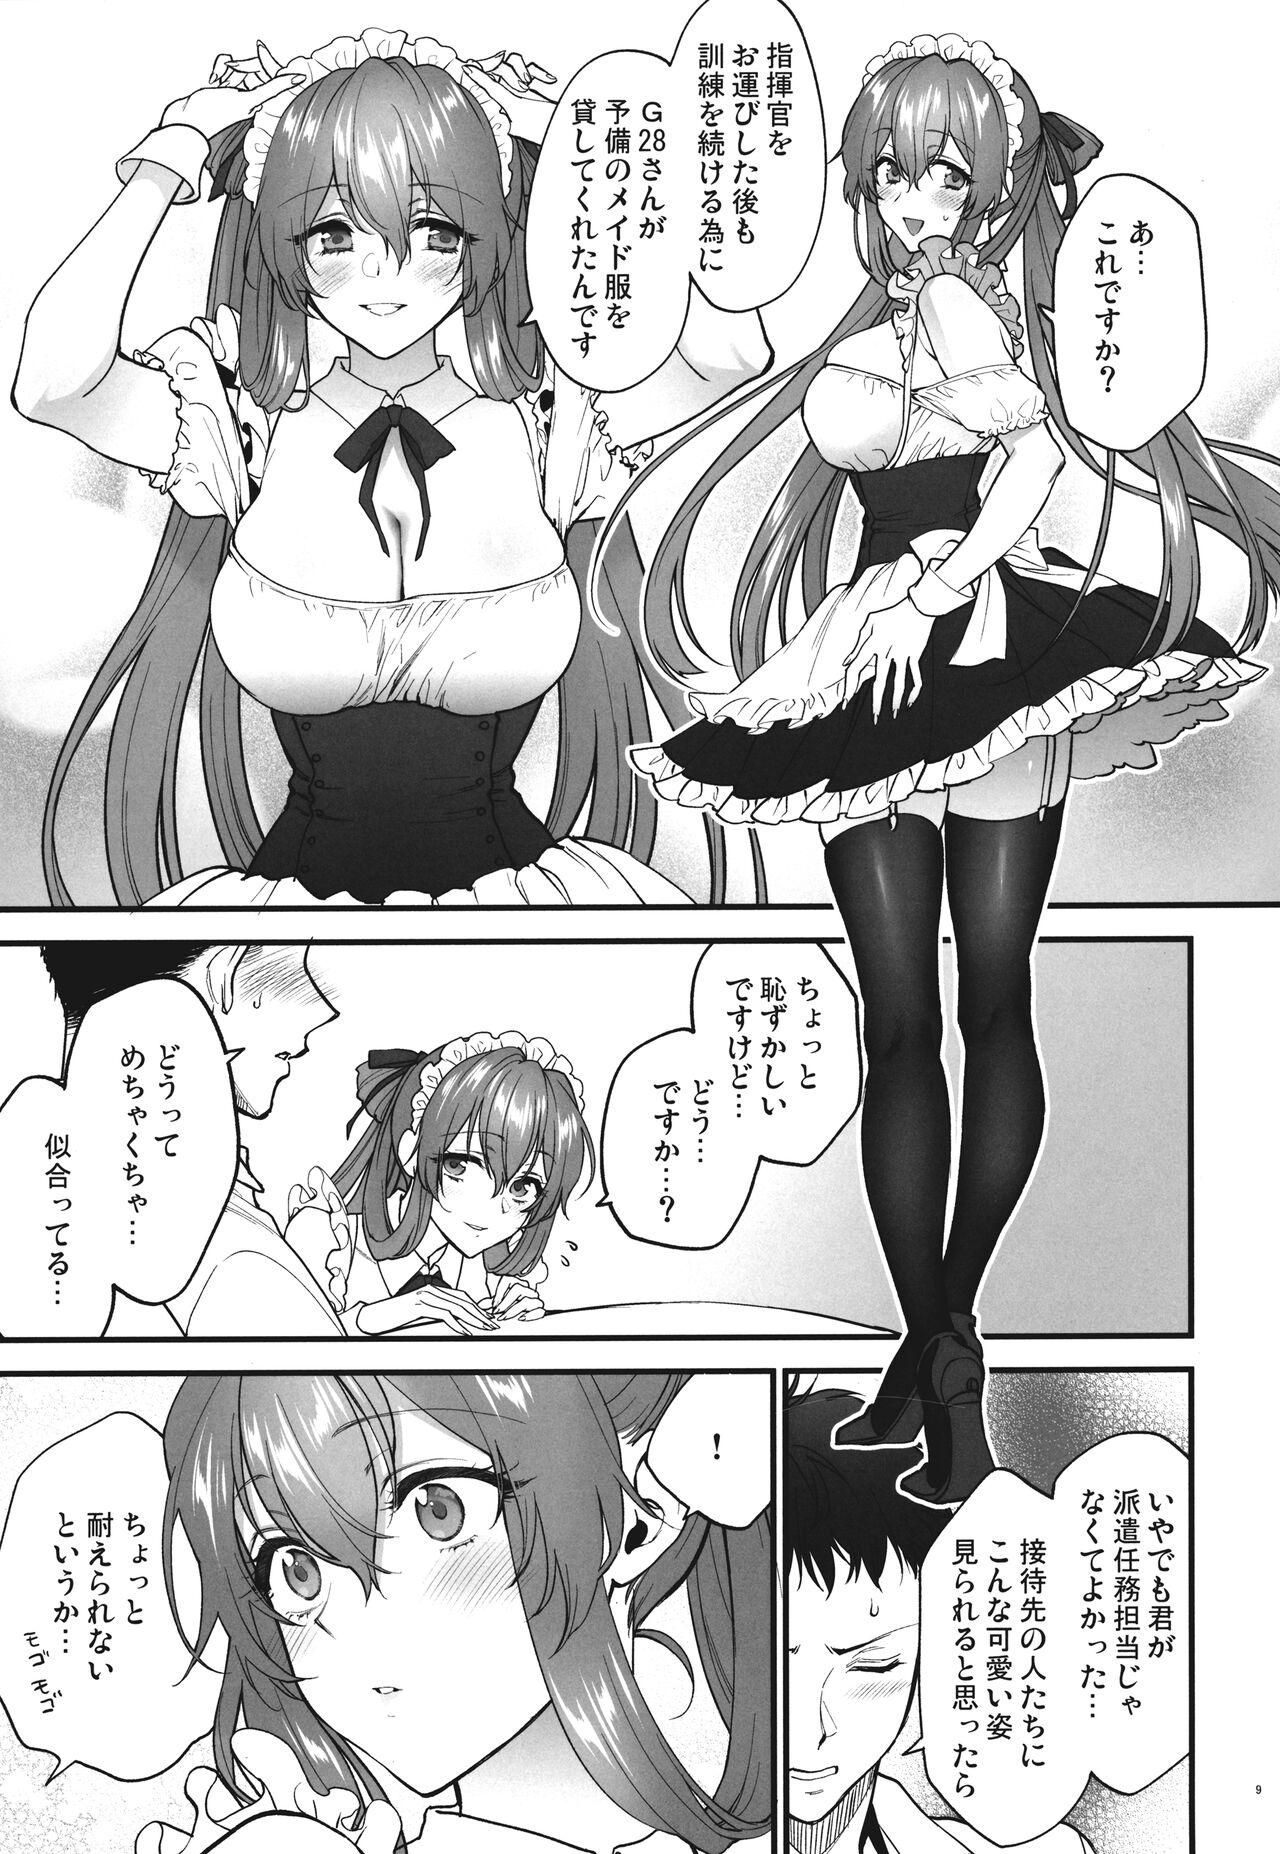 Assfucking Make me Yours - Girls frontline Sapphicerotica - Page 8